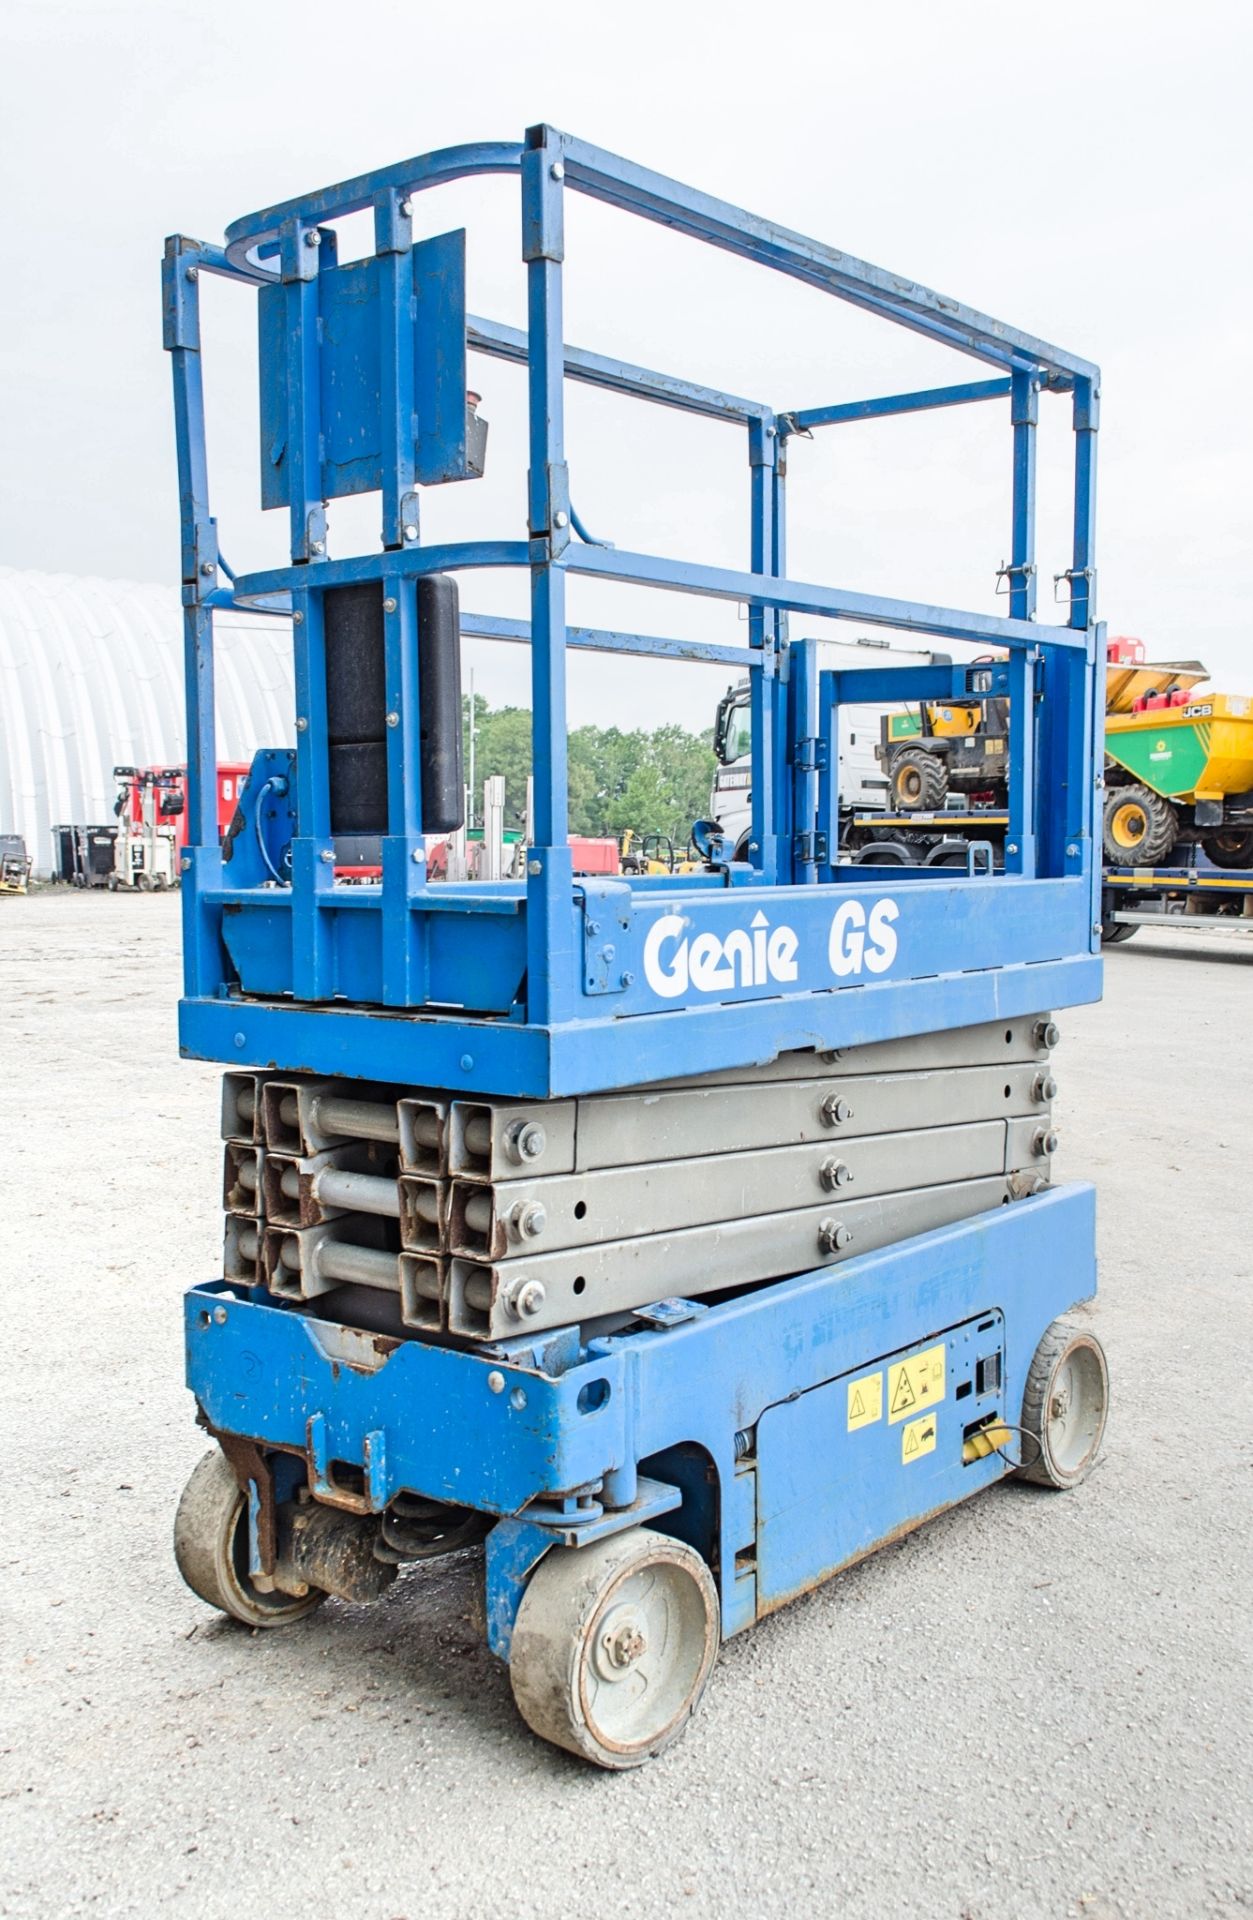 Genie GS1932 battery electric scissor lift Year: 2015 S/N: 14793 Recorded Hours: 180 A679490